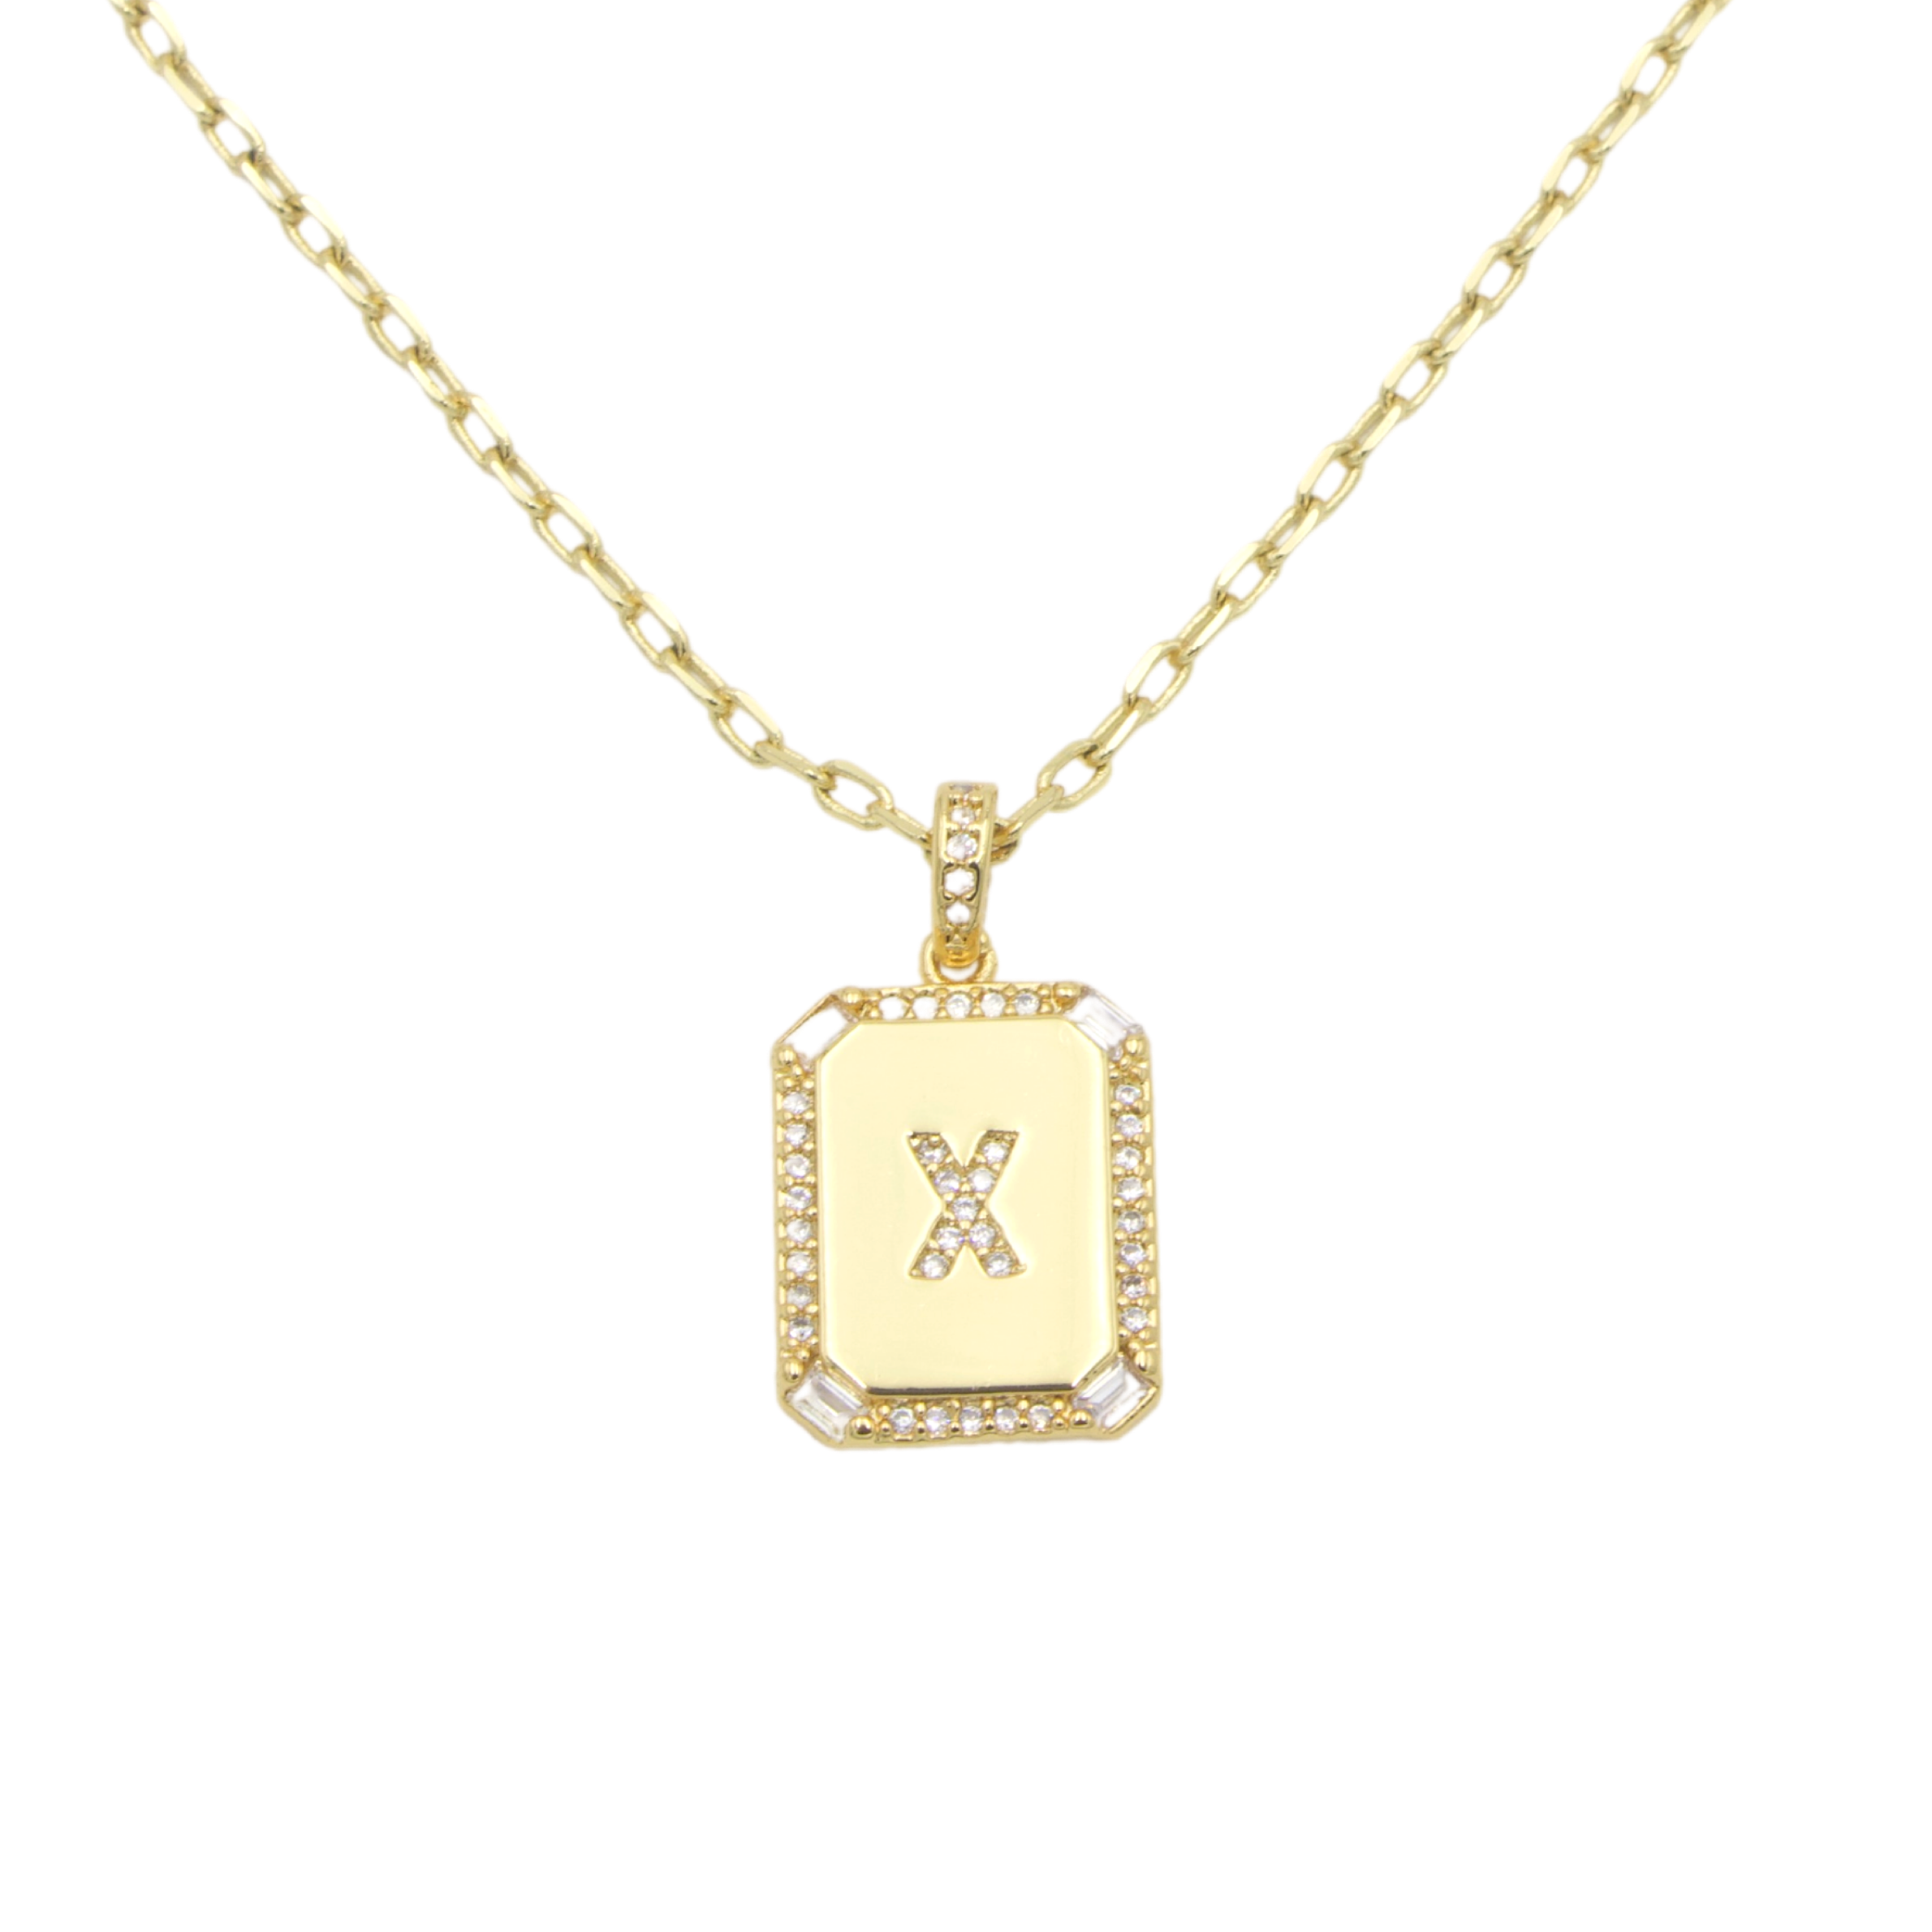 AW Boutique's gold filled 16 inch cable chain necklace finished with a dainty initial pendant with cubic zirconia detail. X initial shown.